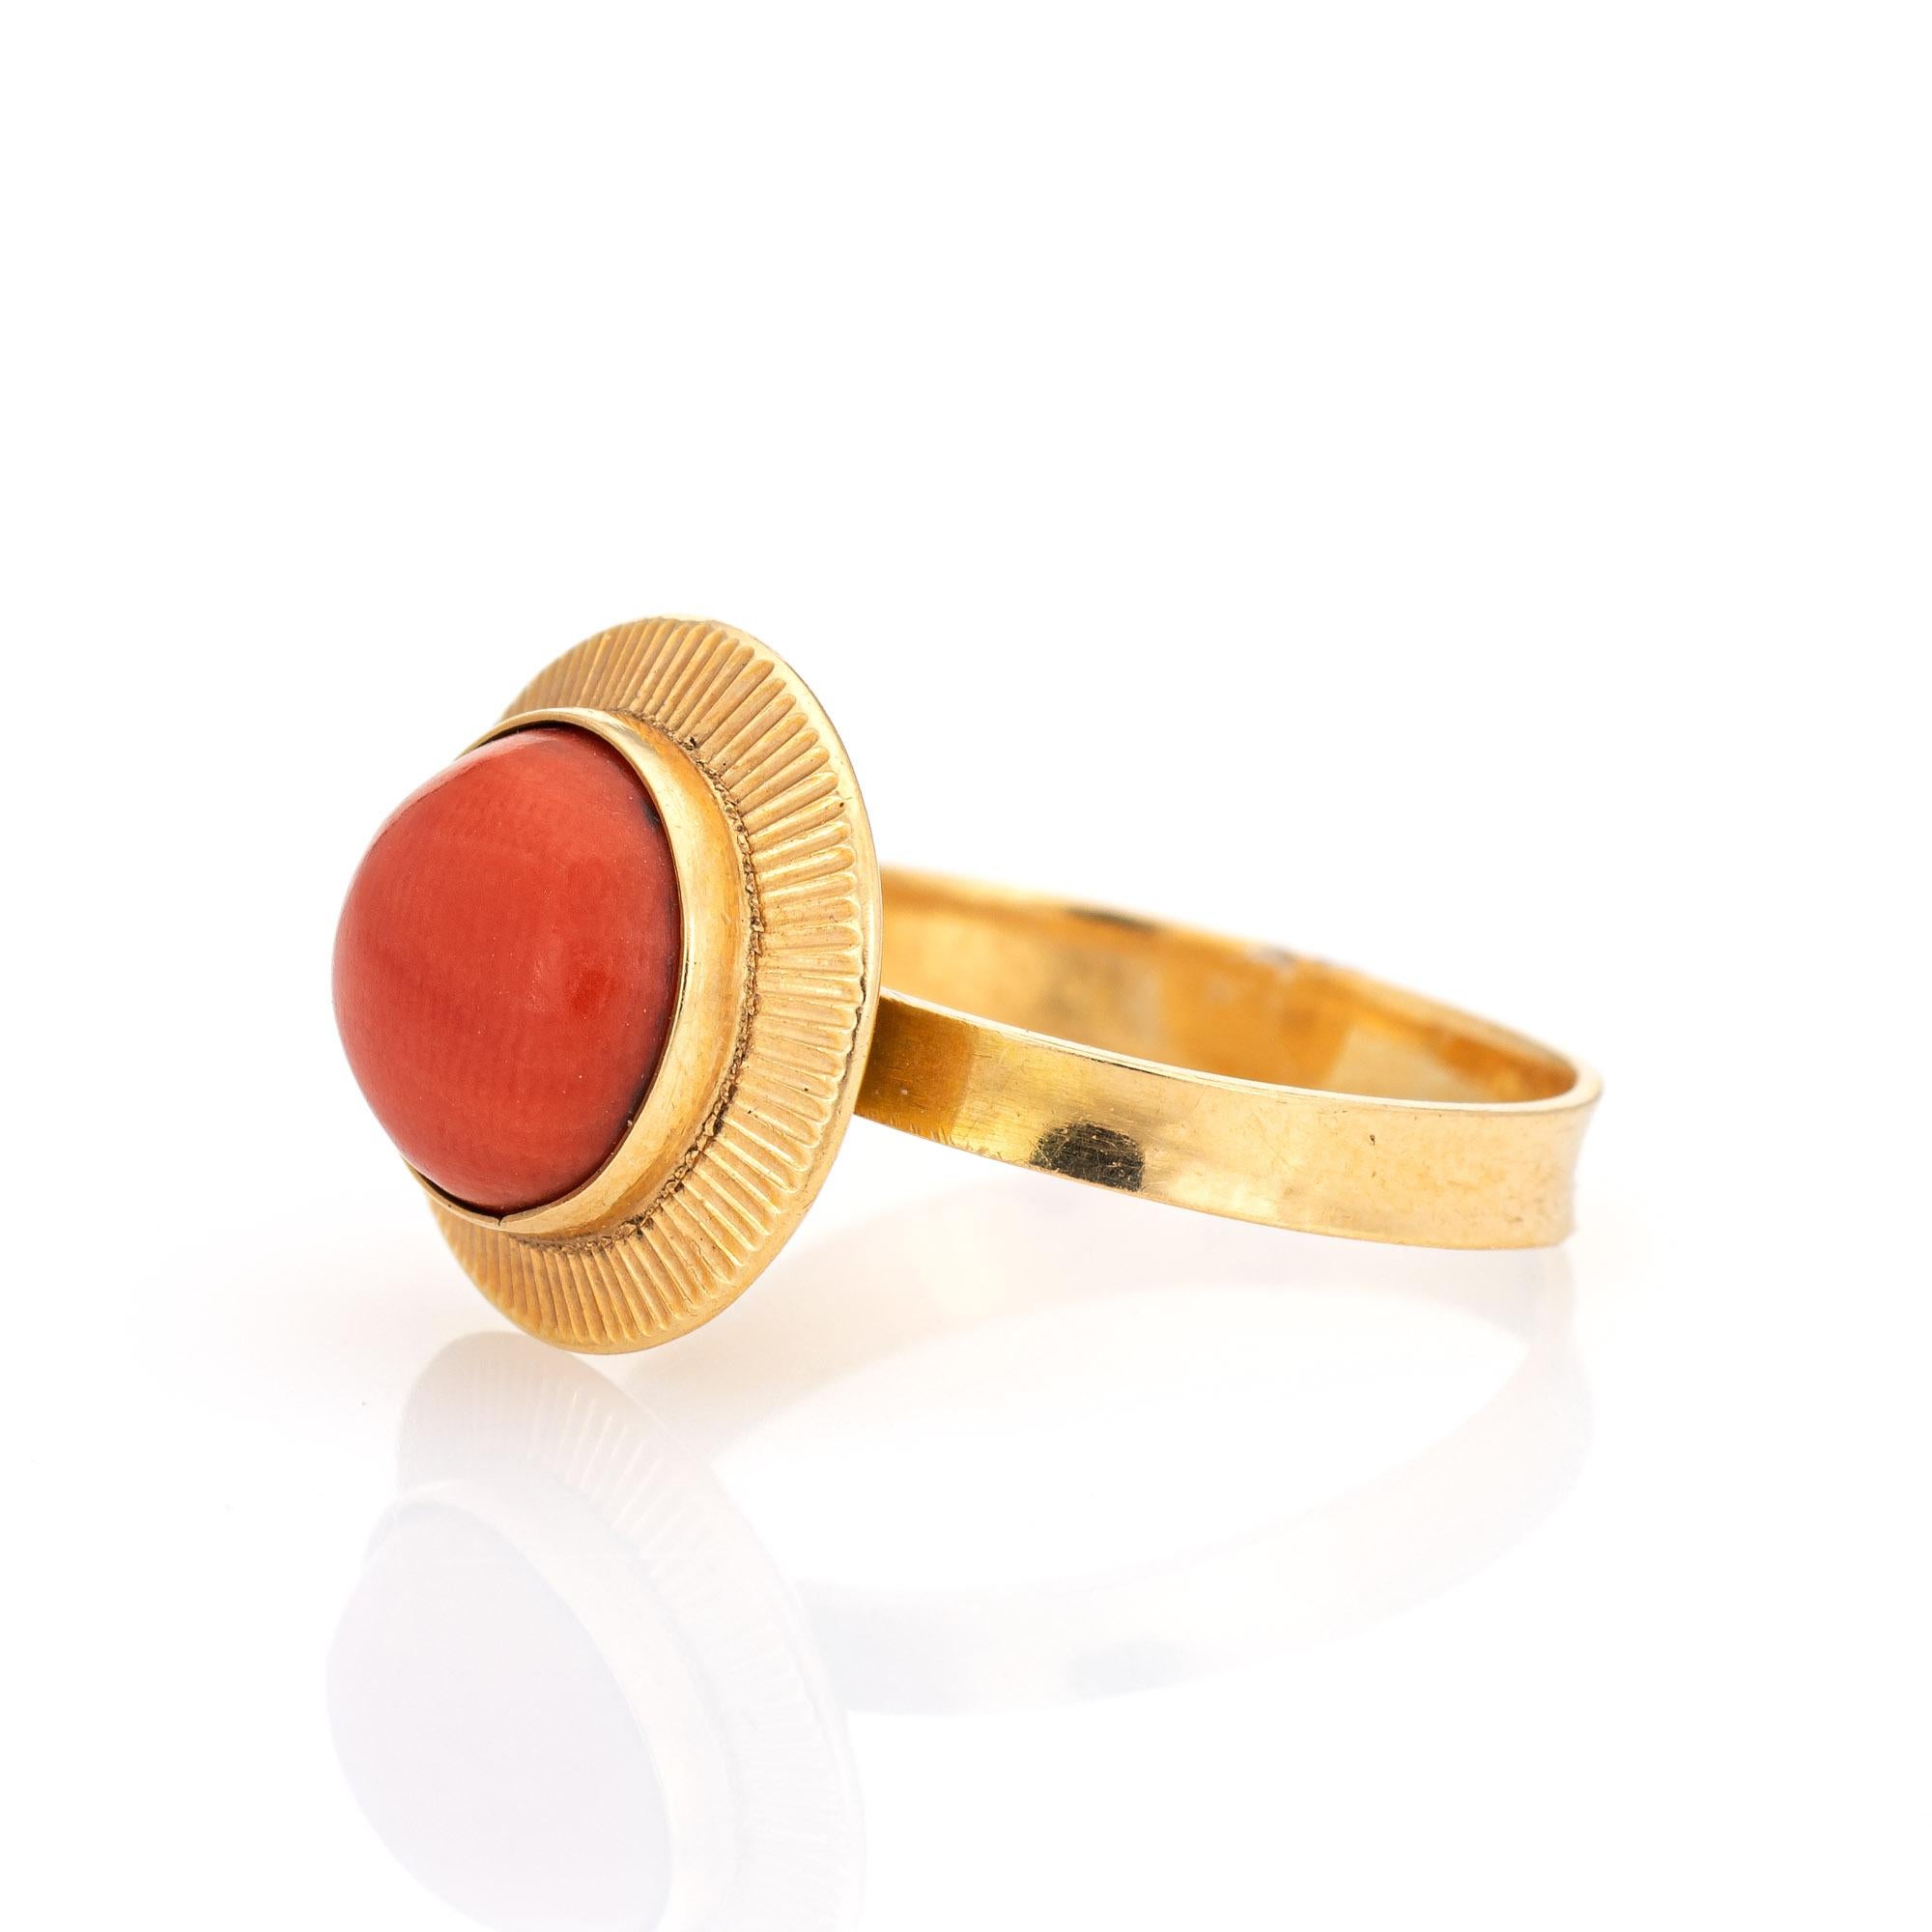 Cabochon Natural Salmon Coral Ring Vintage 18 Karat Gold Small Round Estate Jewelry